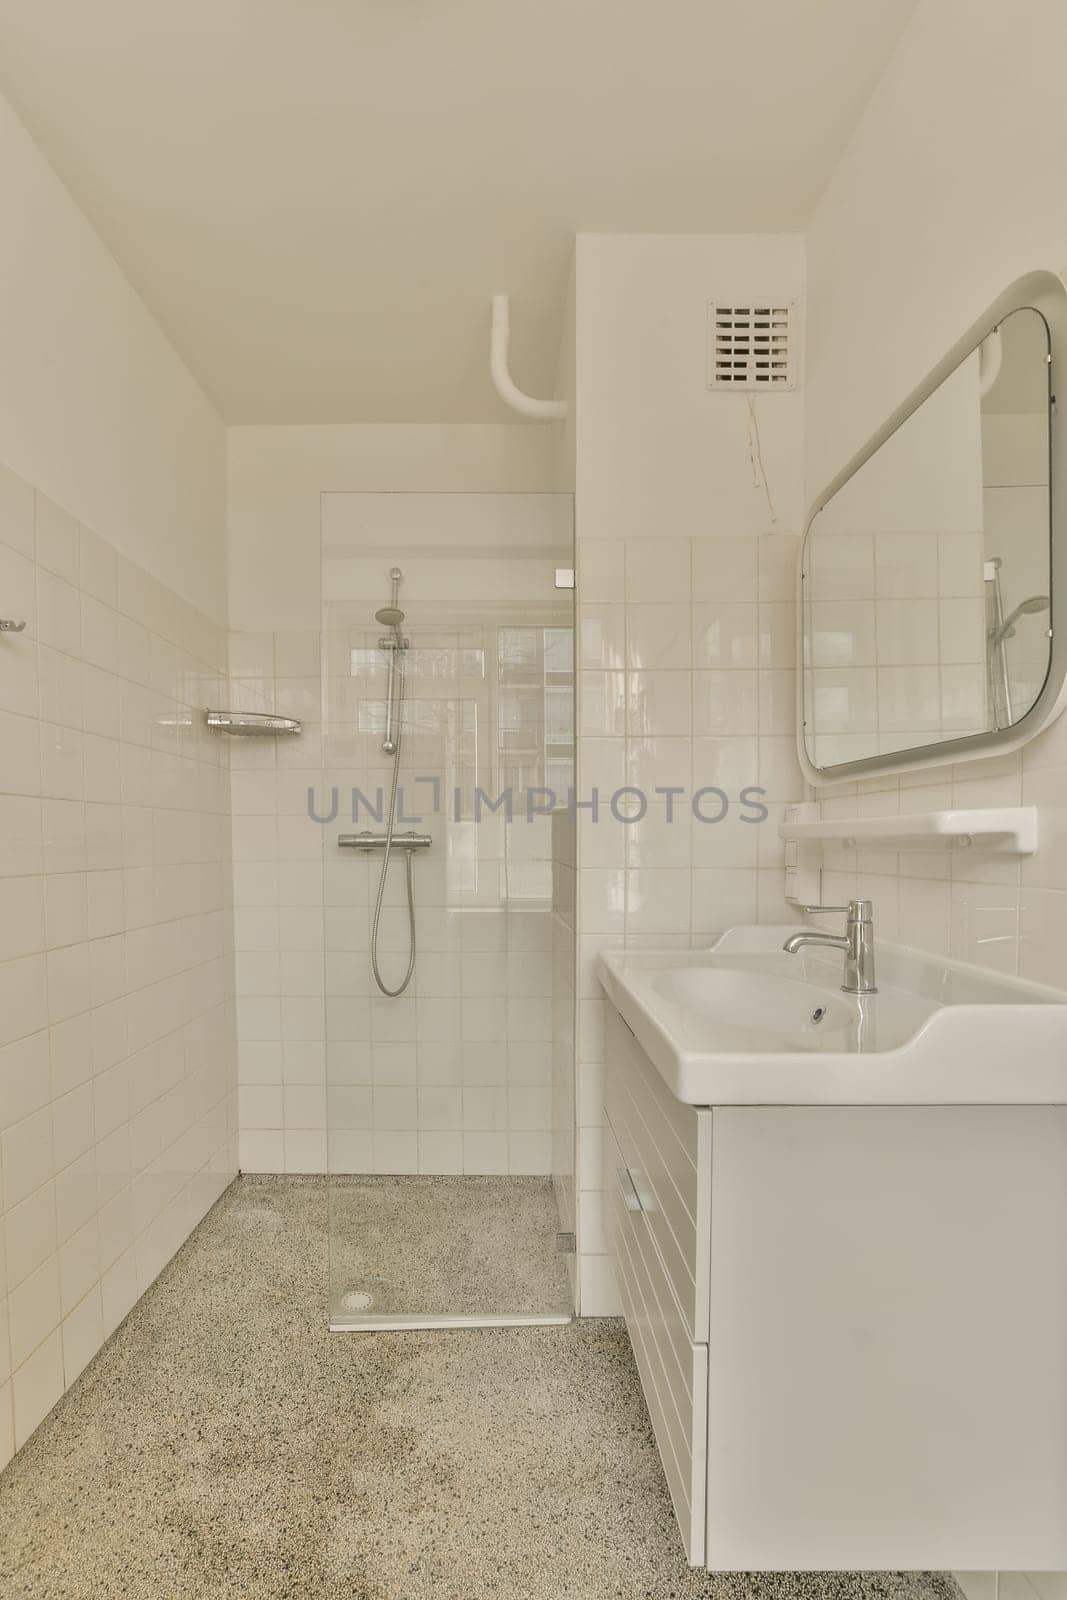 a bathroom with a sink, mirror and shower head mounted on the wall in it's corner to the left